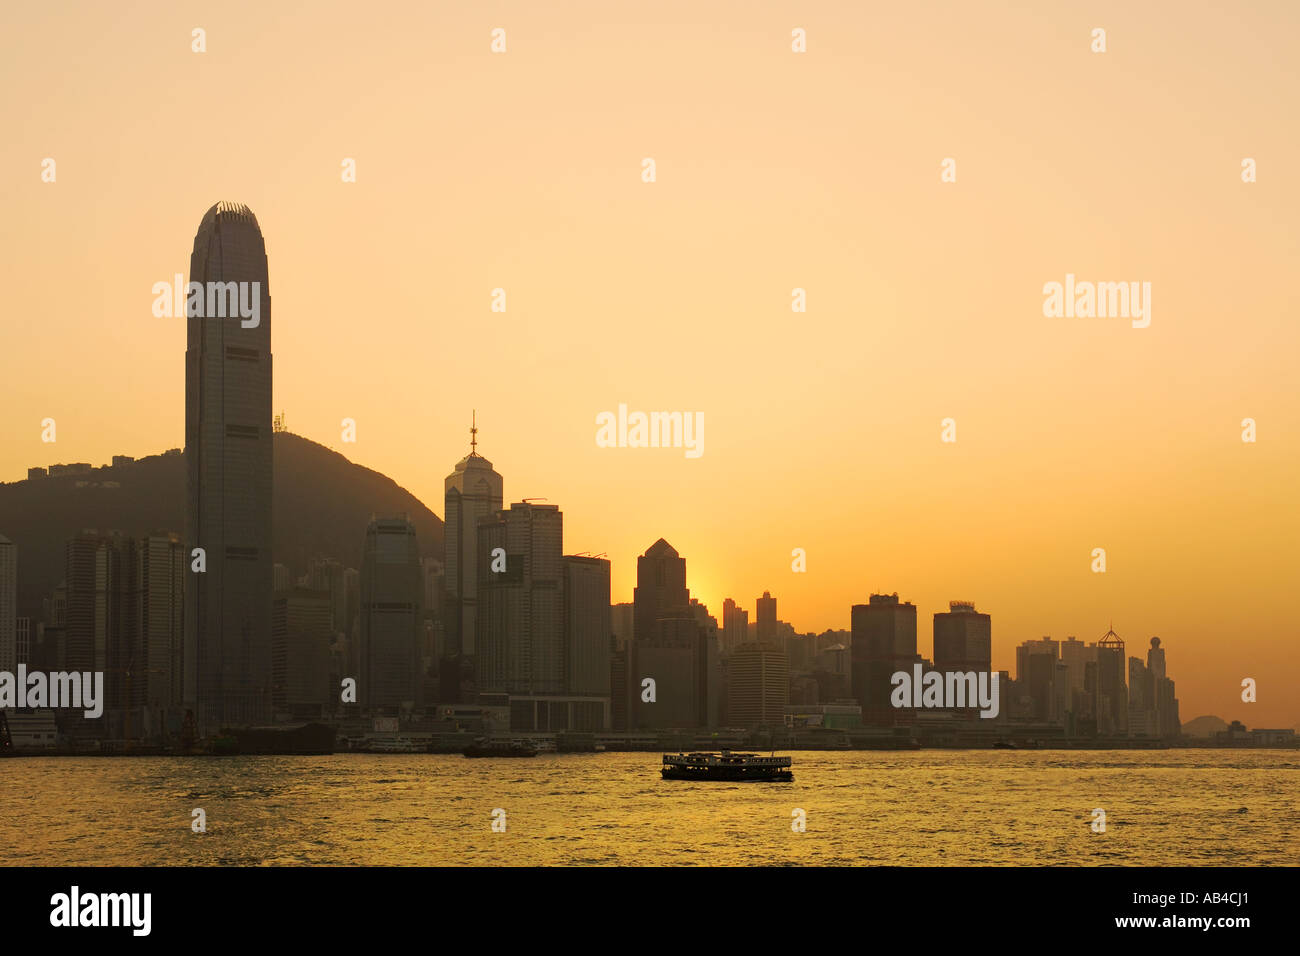 A sunset view of skyscrapers on Hong Kong Island over Victoria Harbour with the IFC building (tallest in Hong Kong) left. Stock Photo